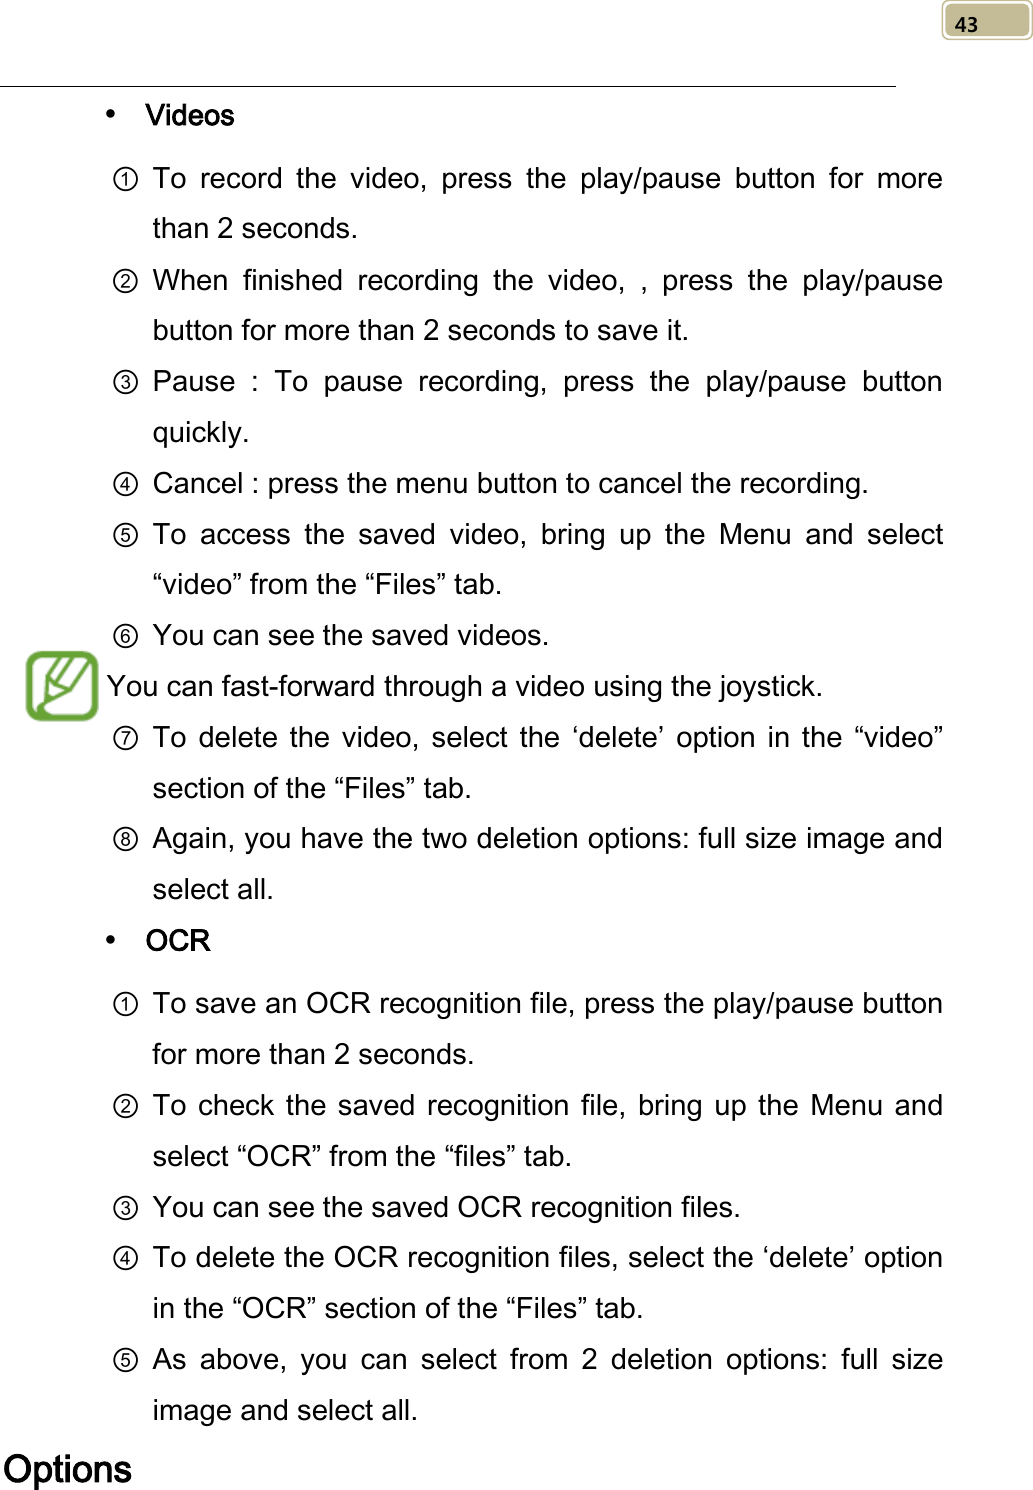   43  Videos ① To record the video, press the play/pause button for more than 2 seconds. ② When finished recording the video,  , press the play/pause button for more than 2 seconds to save it. ③ Pause : To pause recording, press the play/pause button quickly. ④ Cancel : press the menu button to cancel the recording. ⑤ To  access  the saved video, bring up the Menu and select “video” from the “Files” tab. ⑥ You can see the saved videos. You can fast-forward through a video using the joystick. ⑦ To delete the video, select the ‘delete’  option  in the “video” section of the “Files” tab. ⑧ Again, you have the two deletion options: full size image and select all.  OCR ① To save an OCR recognition file, press the play/pause button for more than 2 seconds. ② To check the saved recognition file, bring up the Menu and select “OCR” from the “files” tab. ③ You can see the saved OCR recognition files. ④ To delete the OCR recognition files, select the ‘delete’ option in the “OCR” section of the “Files” tab. ⑤ As above, you can select from 2 deletion options: full size image and select all. Options 